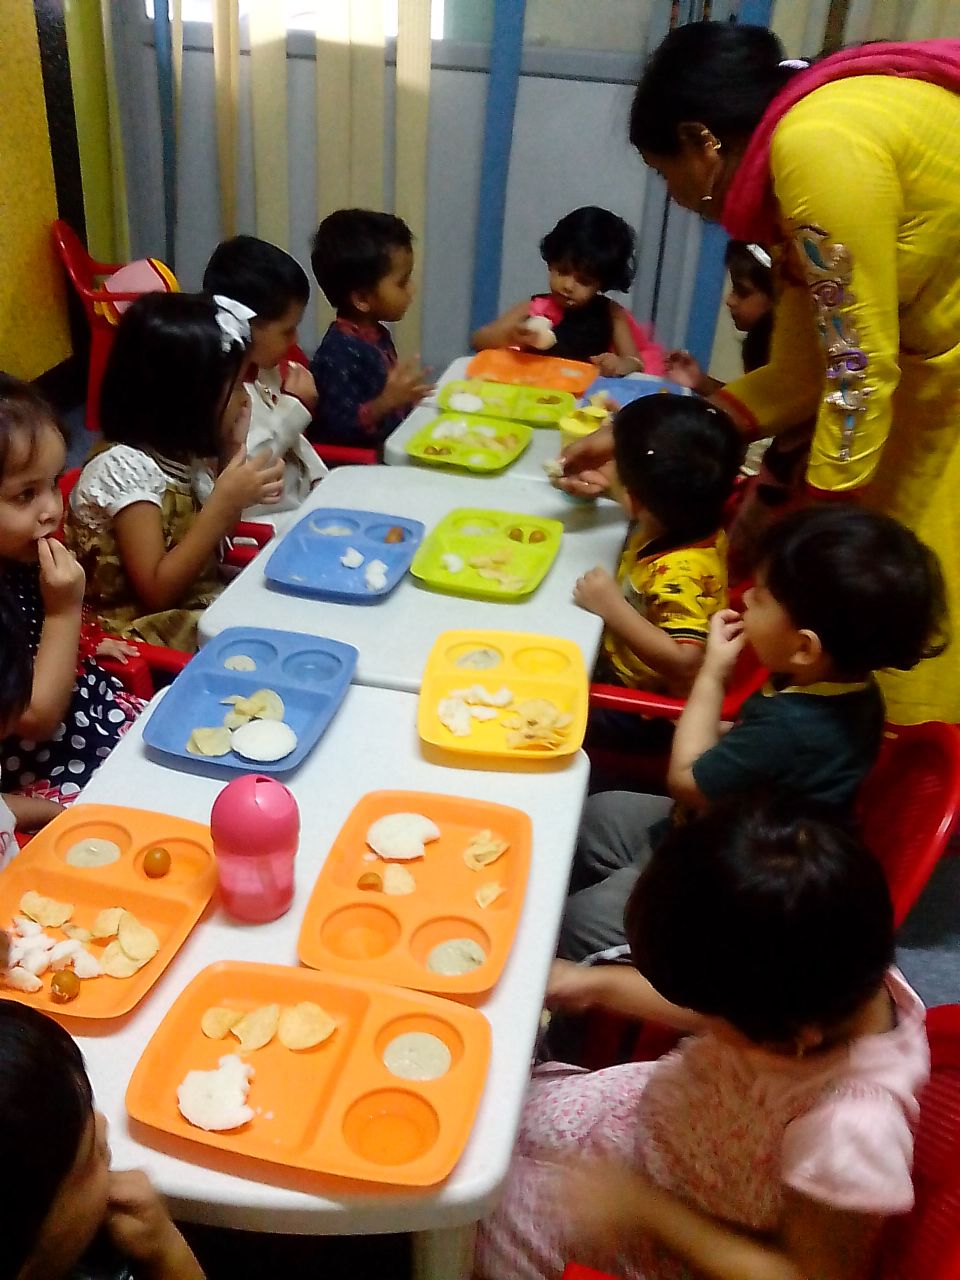 STEP UP KIDS DAY CARE & PRESCHOOL, DAYCARE IN PIMPLE NILAKH, DAY CARE IN PIMPLE NILAKH, BEST DAYCARE IN PIMPLE NILAKH, DAYCARE PIMPLE NILAKH, PRESCHOOL IN PIMPLE NILAKH, BEST PRESCHOOL IN PIMPLE NILAKH, PRESCHOOL PIMPLE NILAKH, BEST.